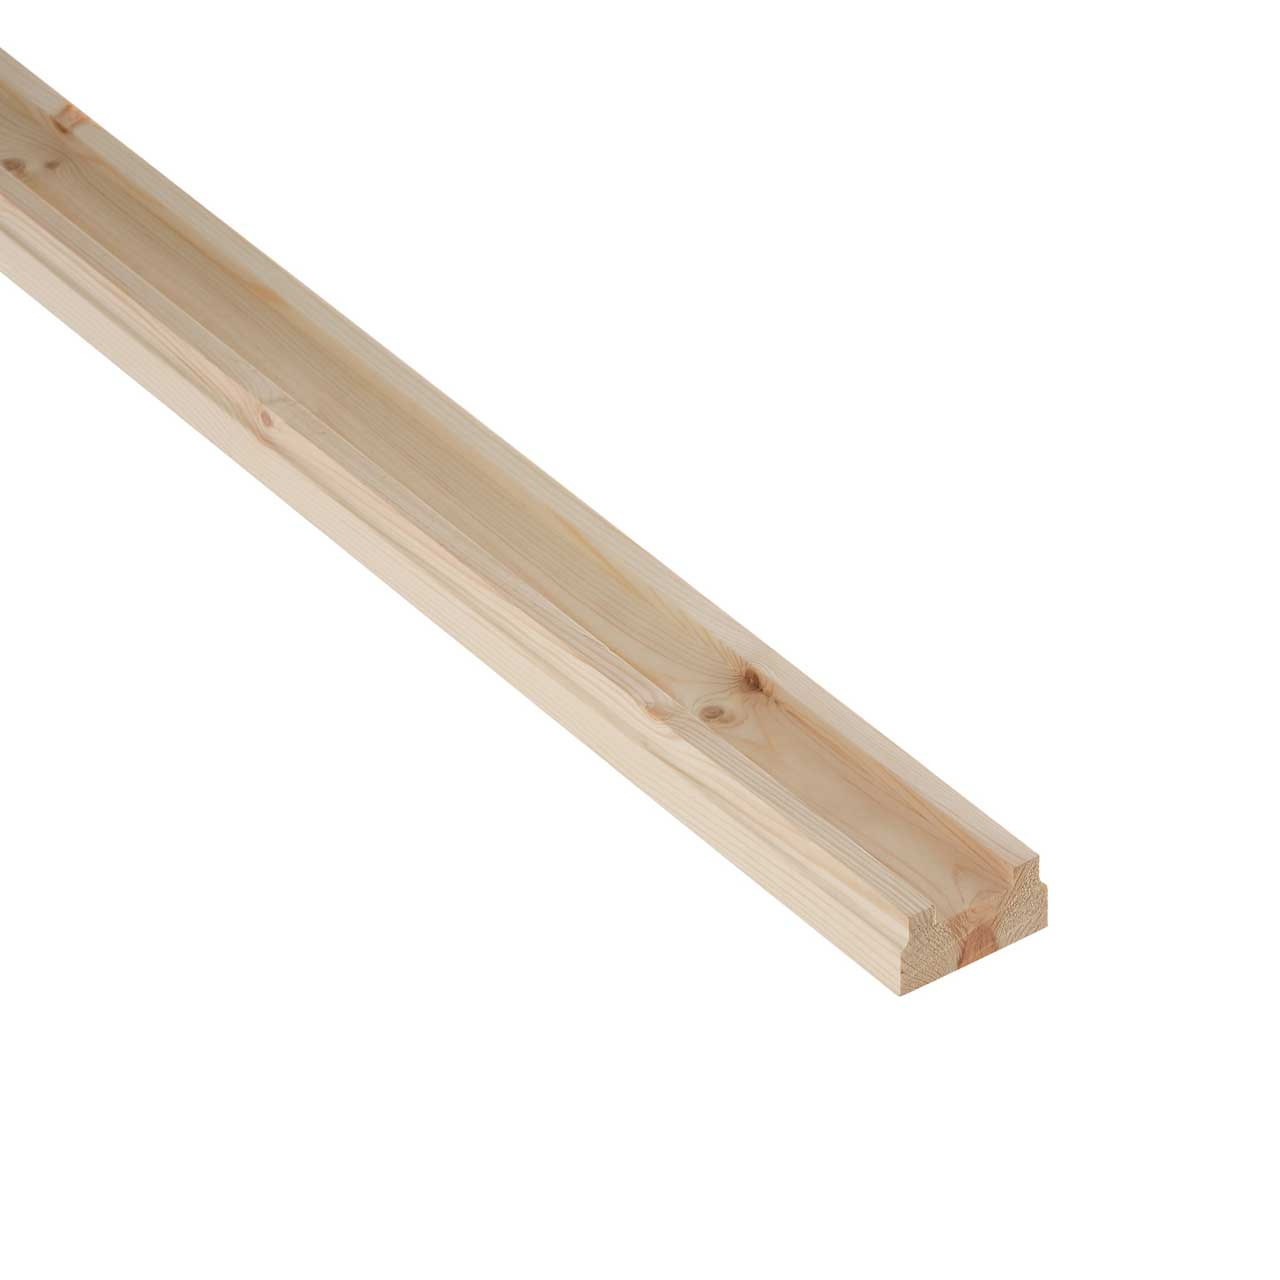 Photograph of Cheshire Mouldings 32mm x 63mm x 4200mm Pine (32mm Spindle) Baserail